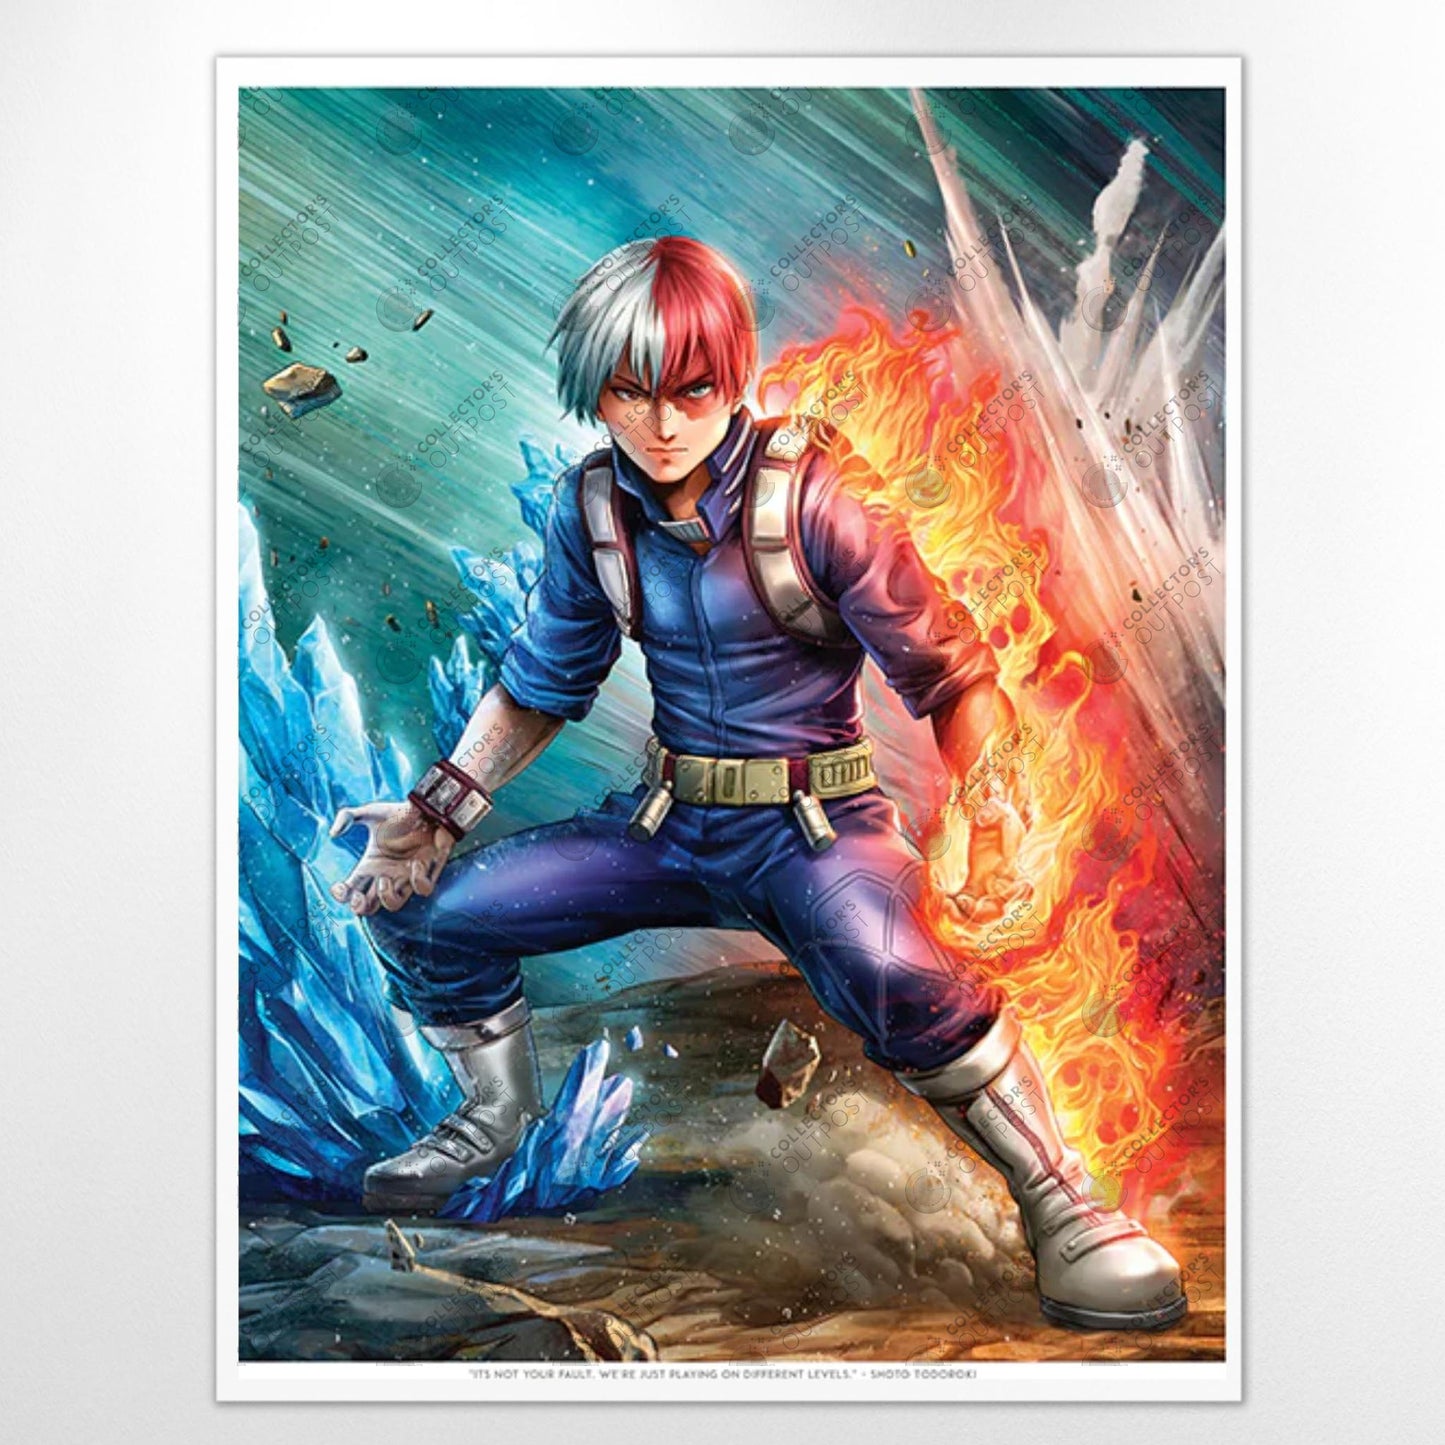 carmen encinas recommends hot pictures of shoto todoroki pic